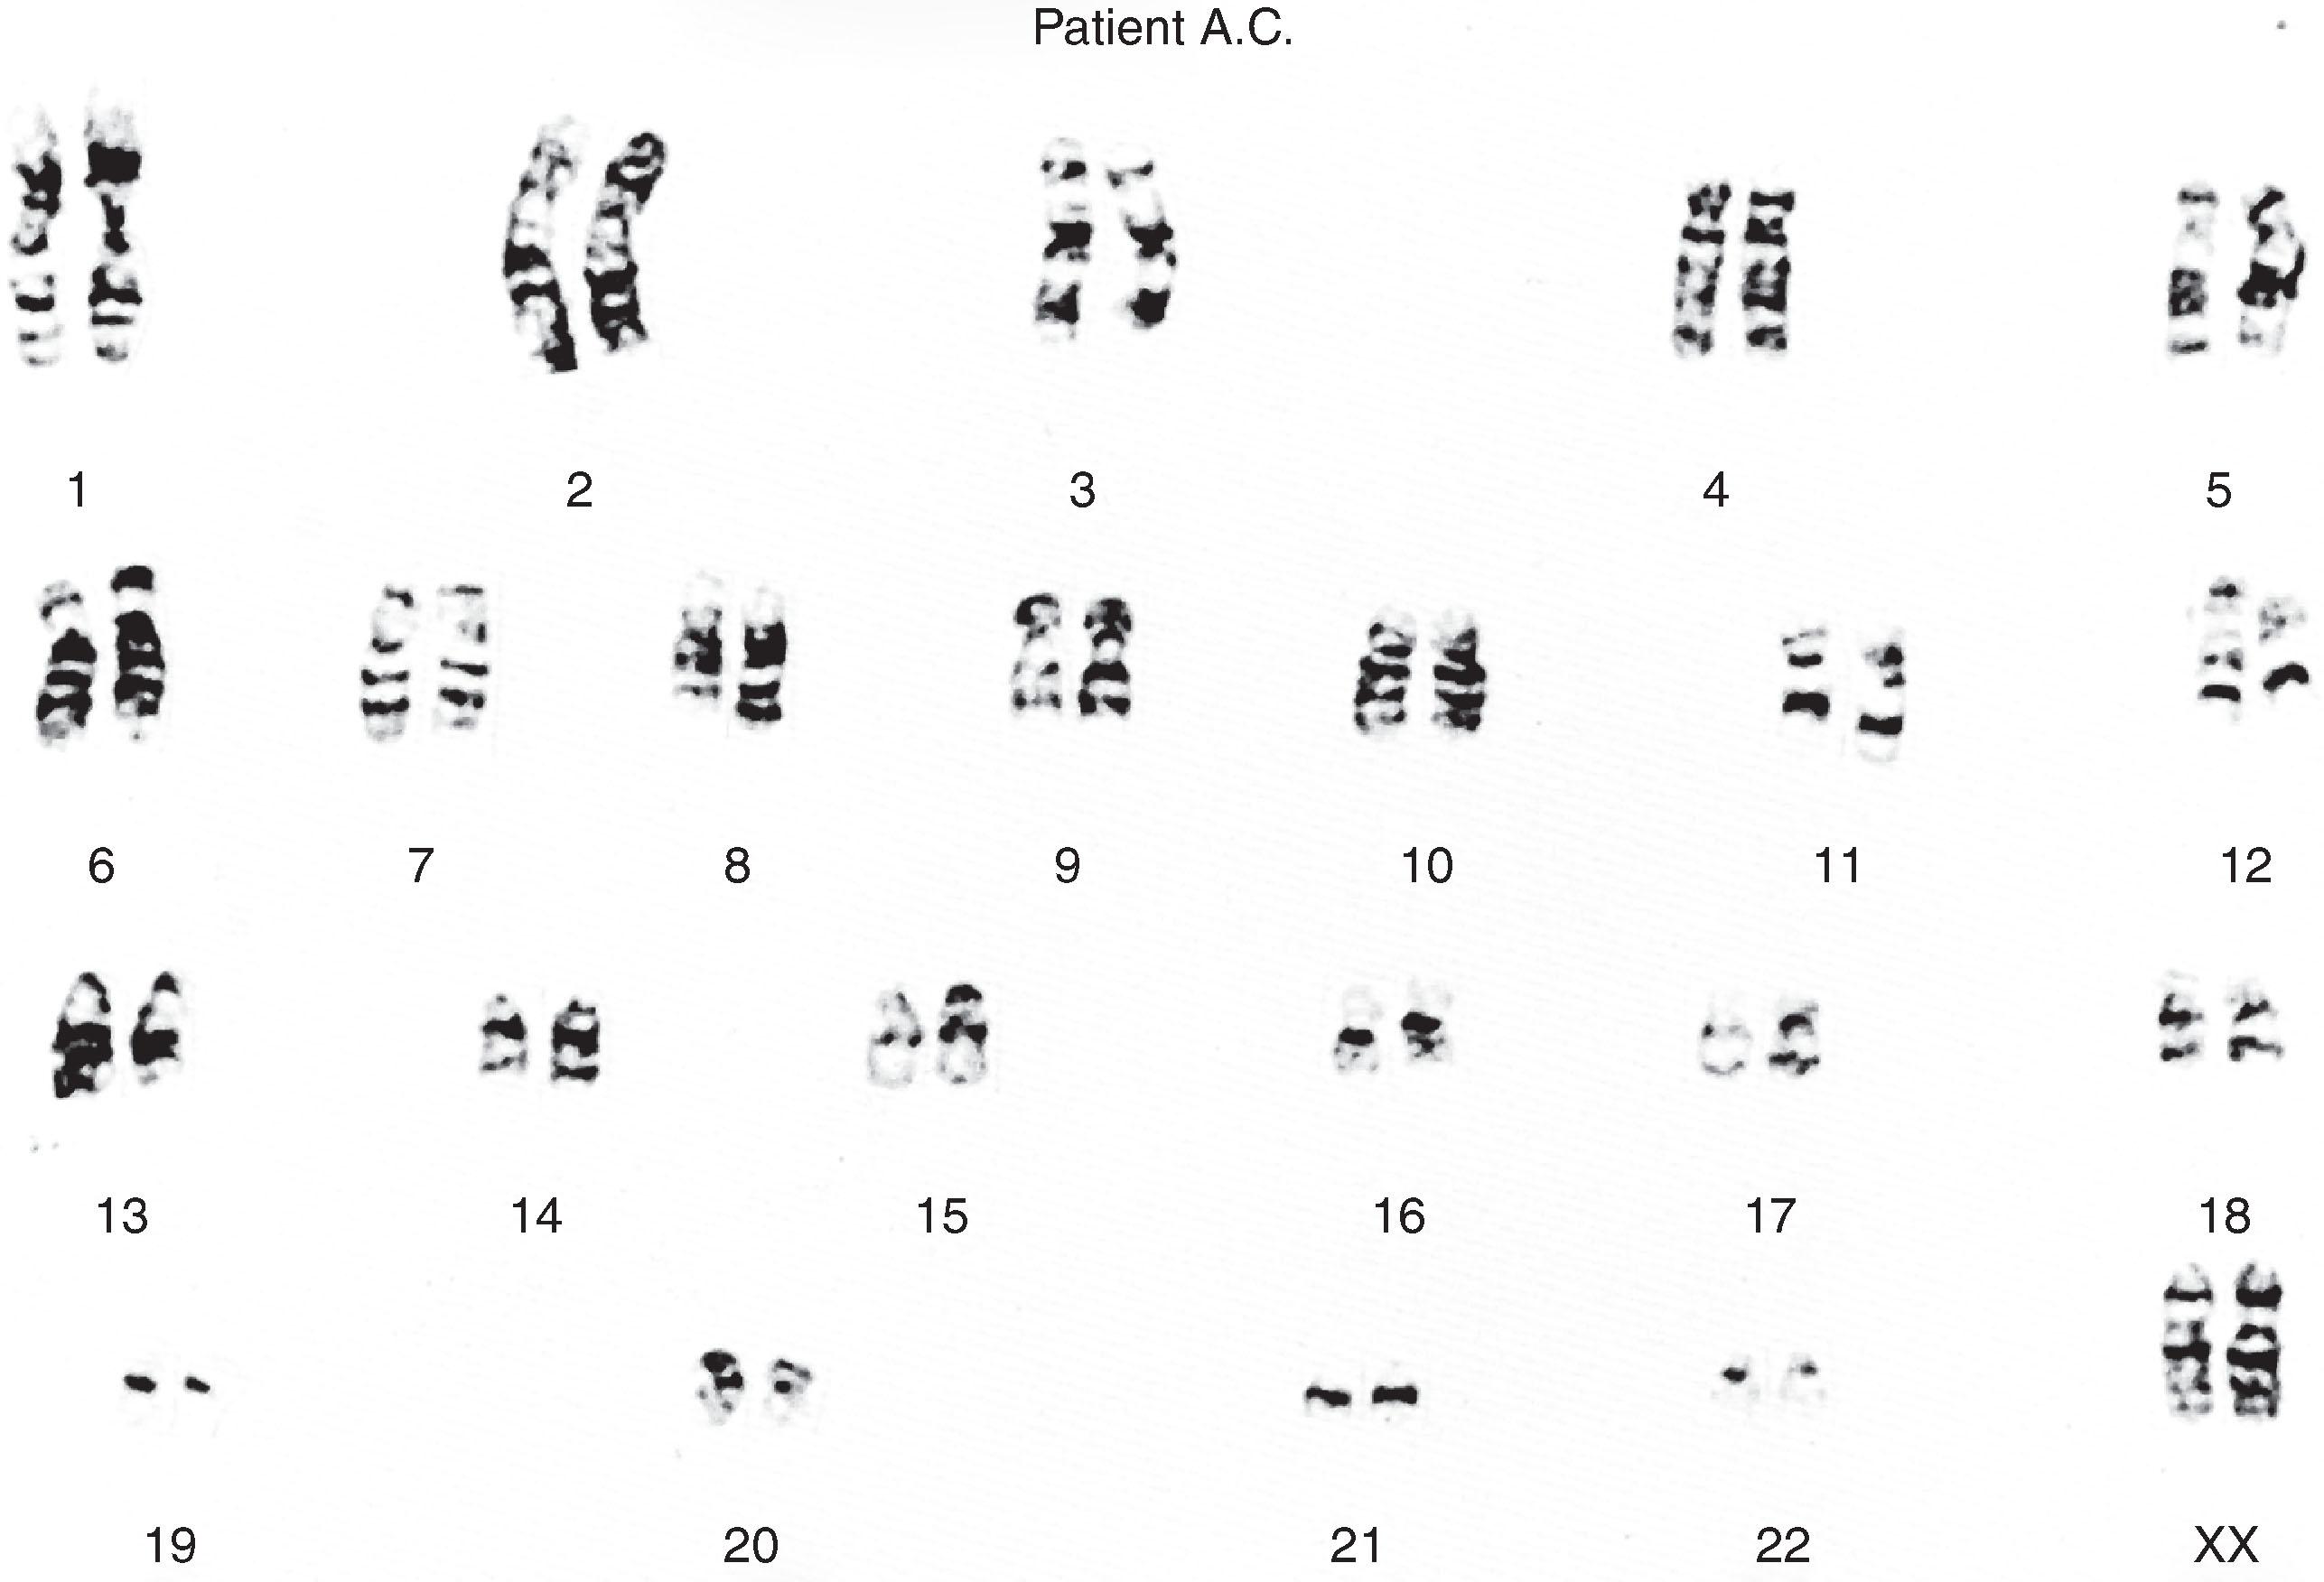 Fig. 2.1, A normal female 46,XX G-banded karyotype illustrating the banding patterns which permit identification of each individual chromosome.